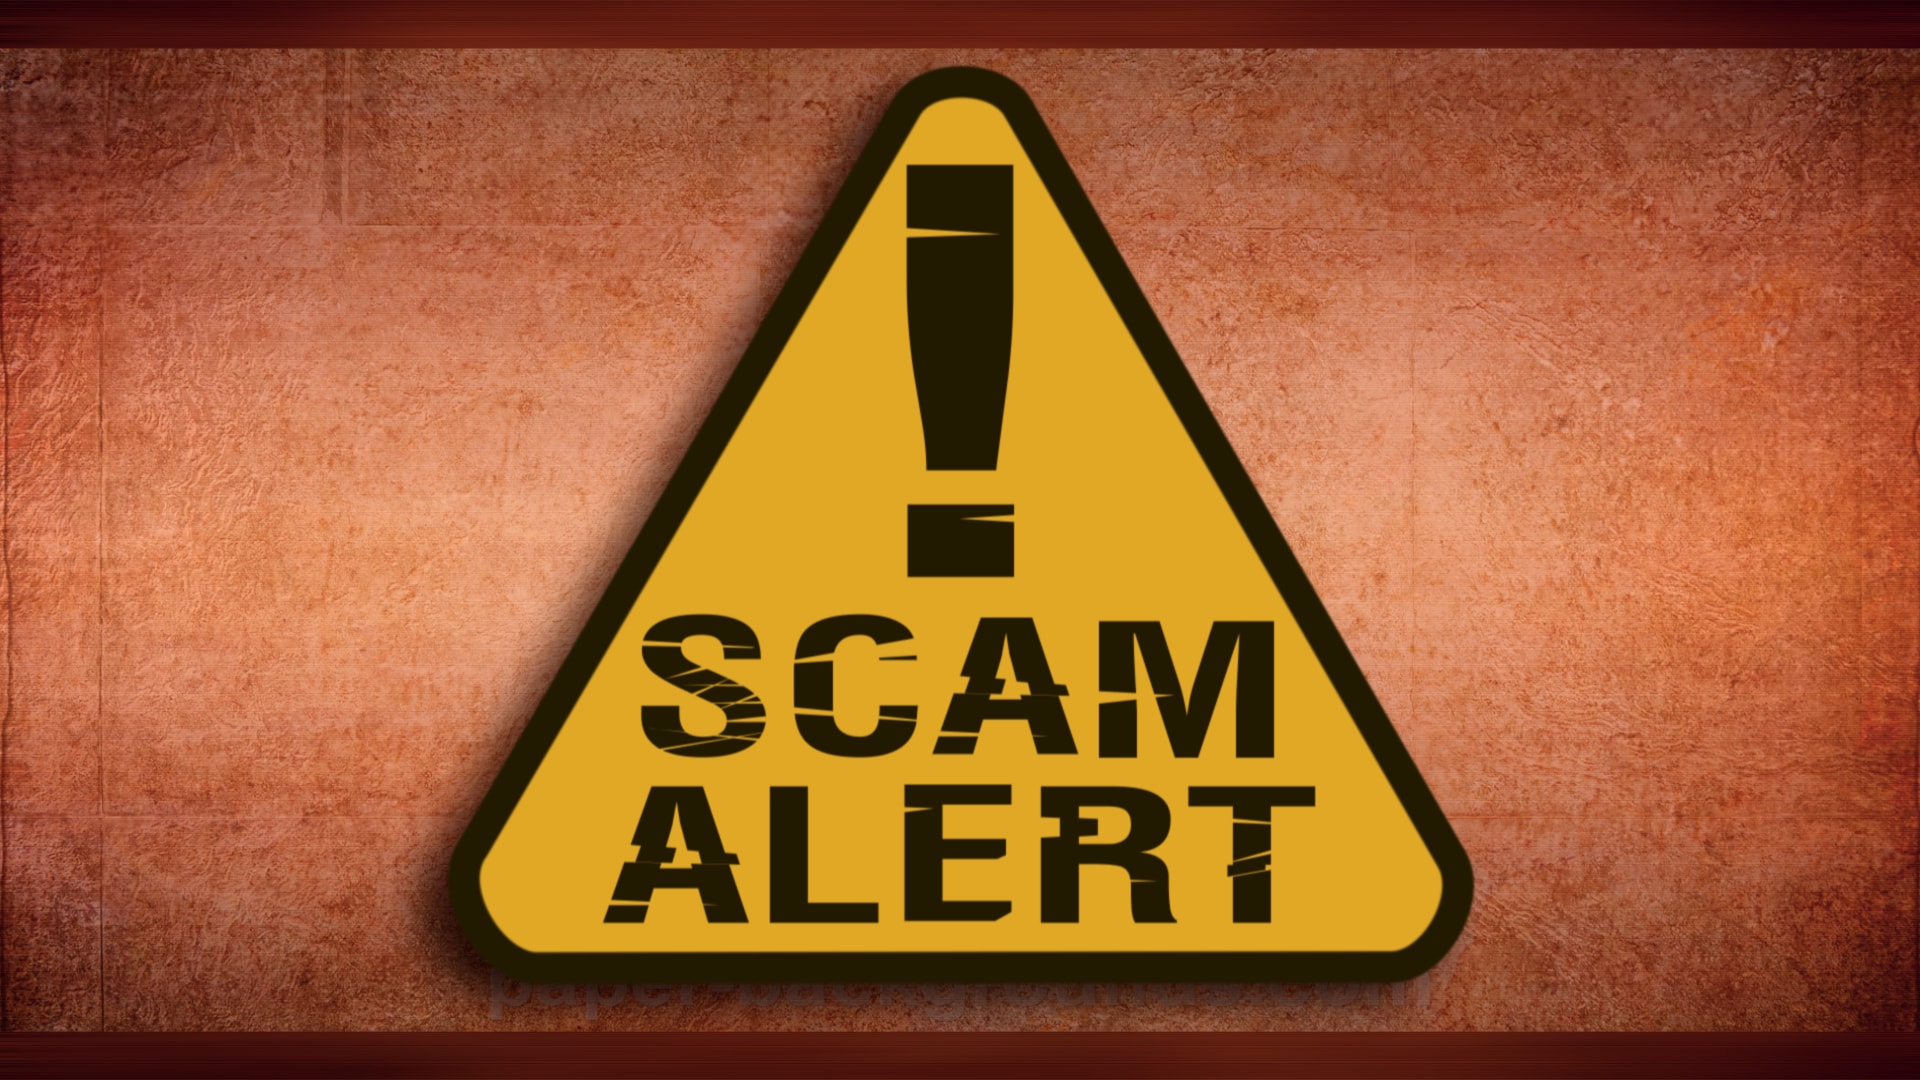 Beware! New York State Faces Rising Tide of Scams - Protect Yourself from the Latest Email Scam